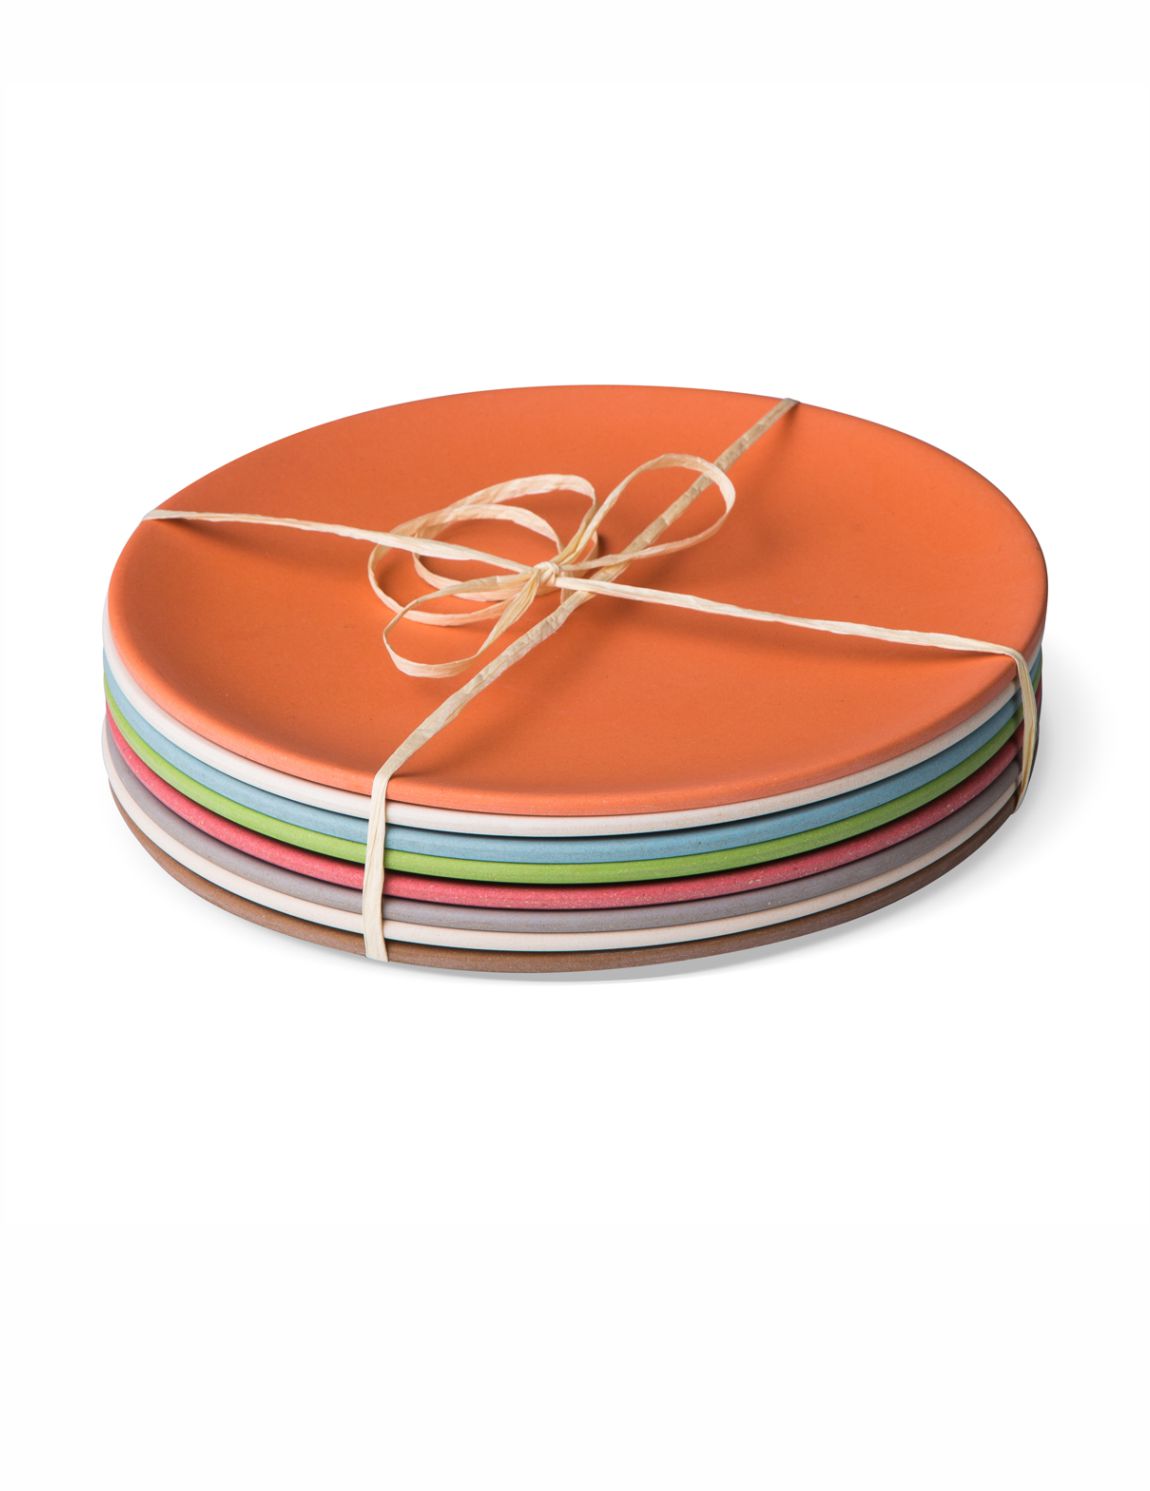 Bamboo dinner plates 26cm - set of 8 mixed colours